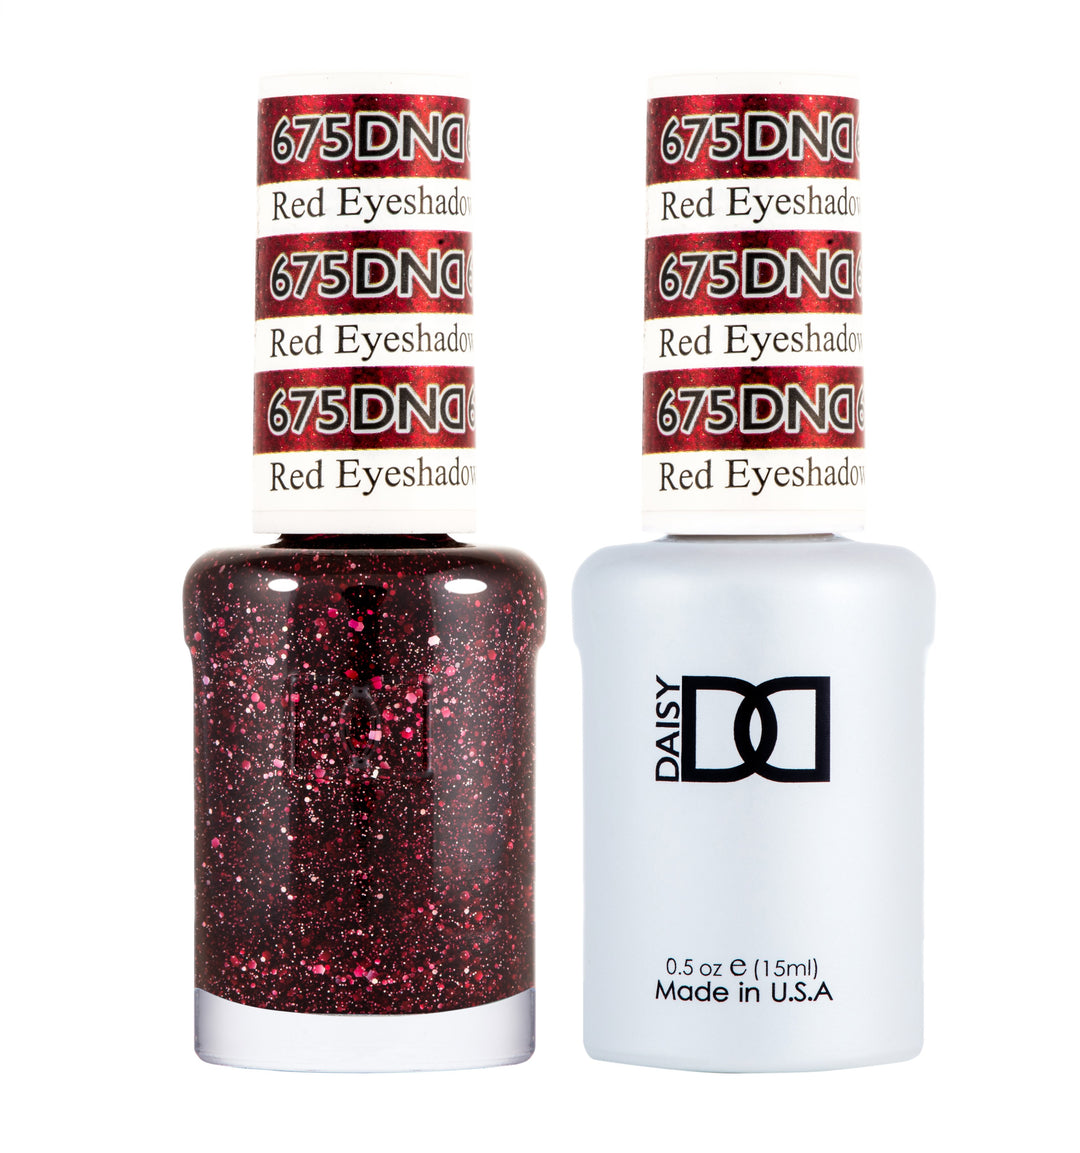 DND DUO Nail Lacquer and UV|LED Gel Polish Red Eyeshadow 675 (2 x 15ml)